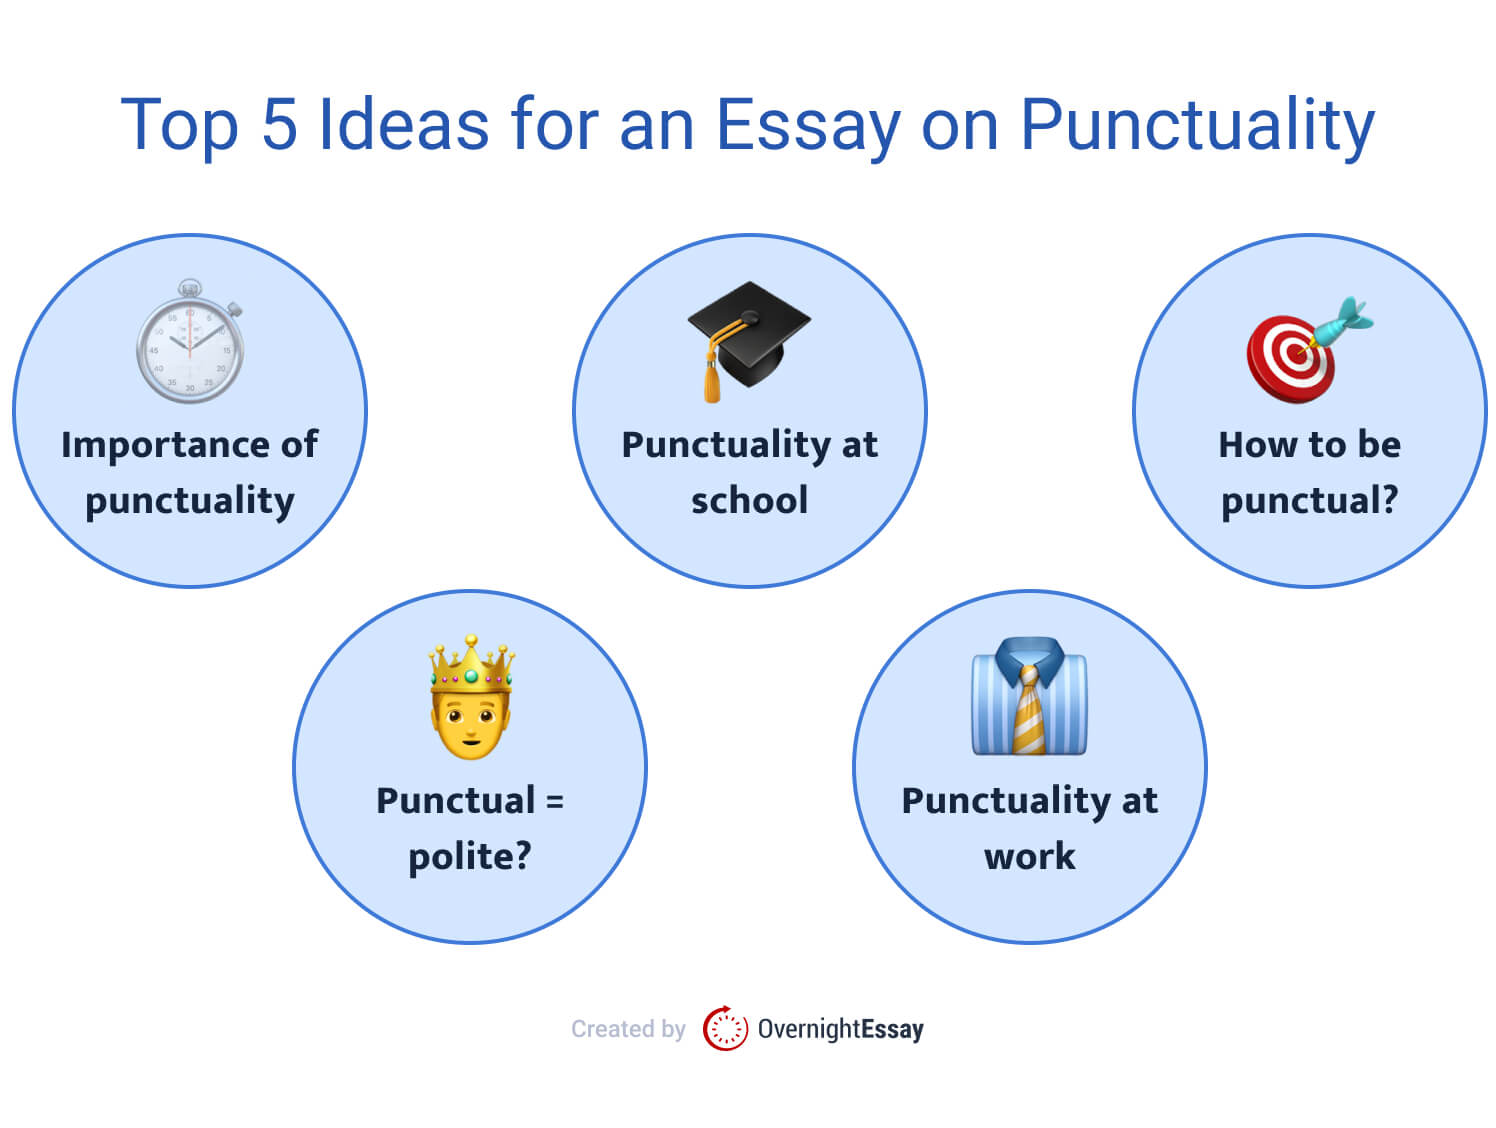 The picture provides a list of the most popular topics for a punctuality essay. 